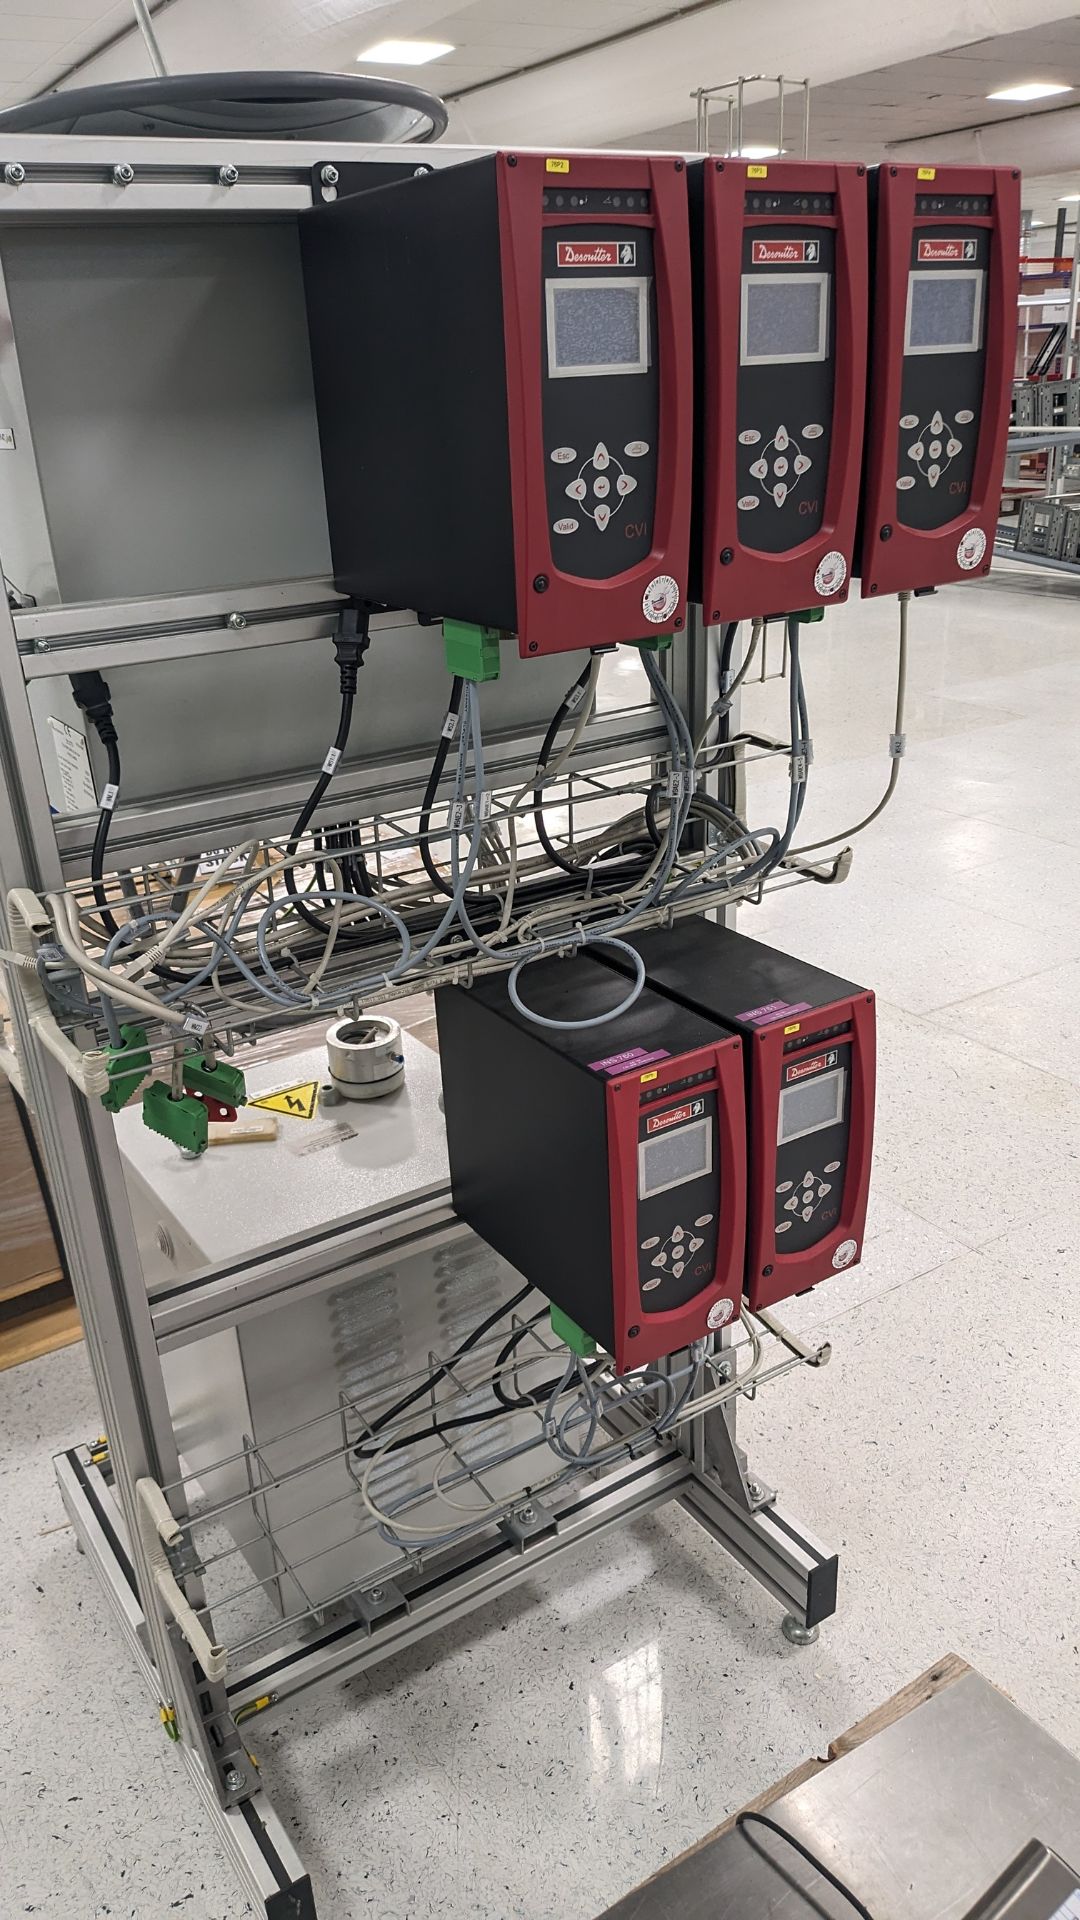 Rig containing 5 Desoutter CVI units and 2 transformers and a box of 5: Desoutter drivers as lotted